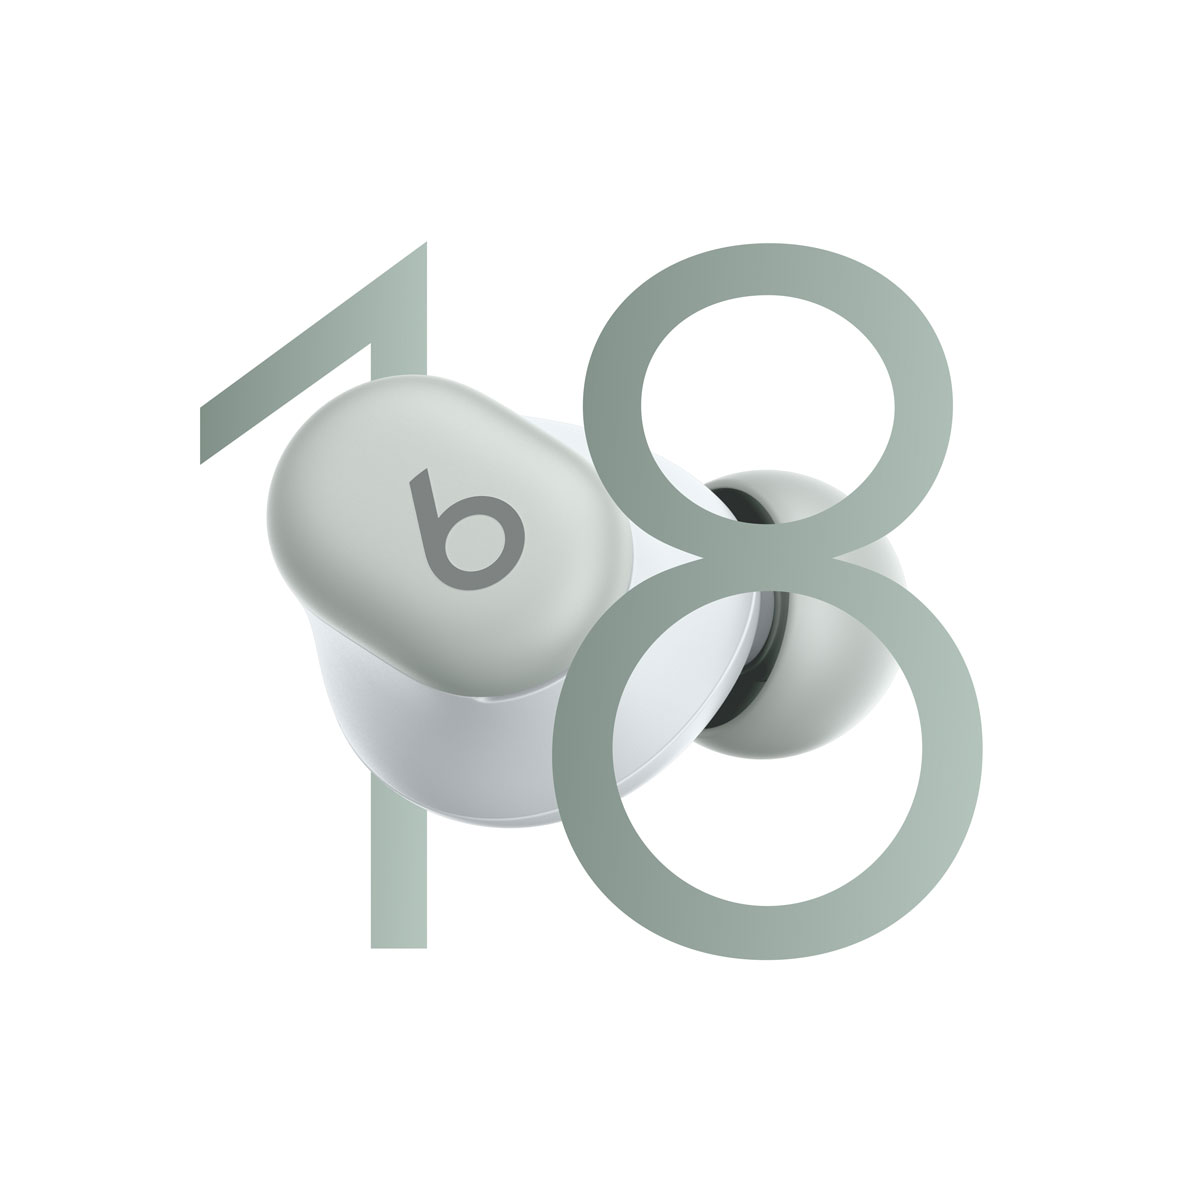 Beats Solo Buds earbud in Matte Black displayed with a graphic of the number ’18'.